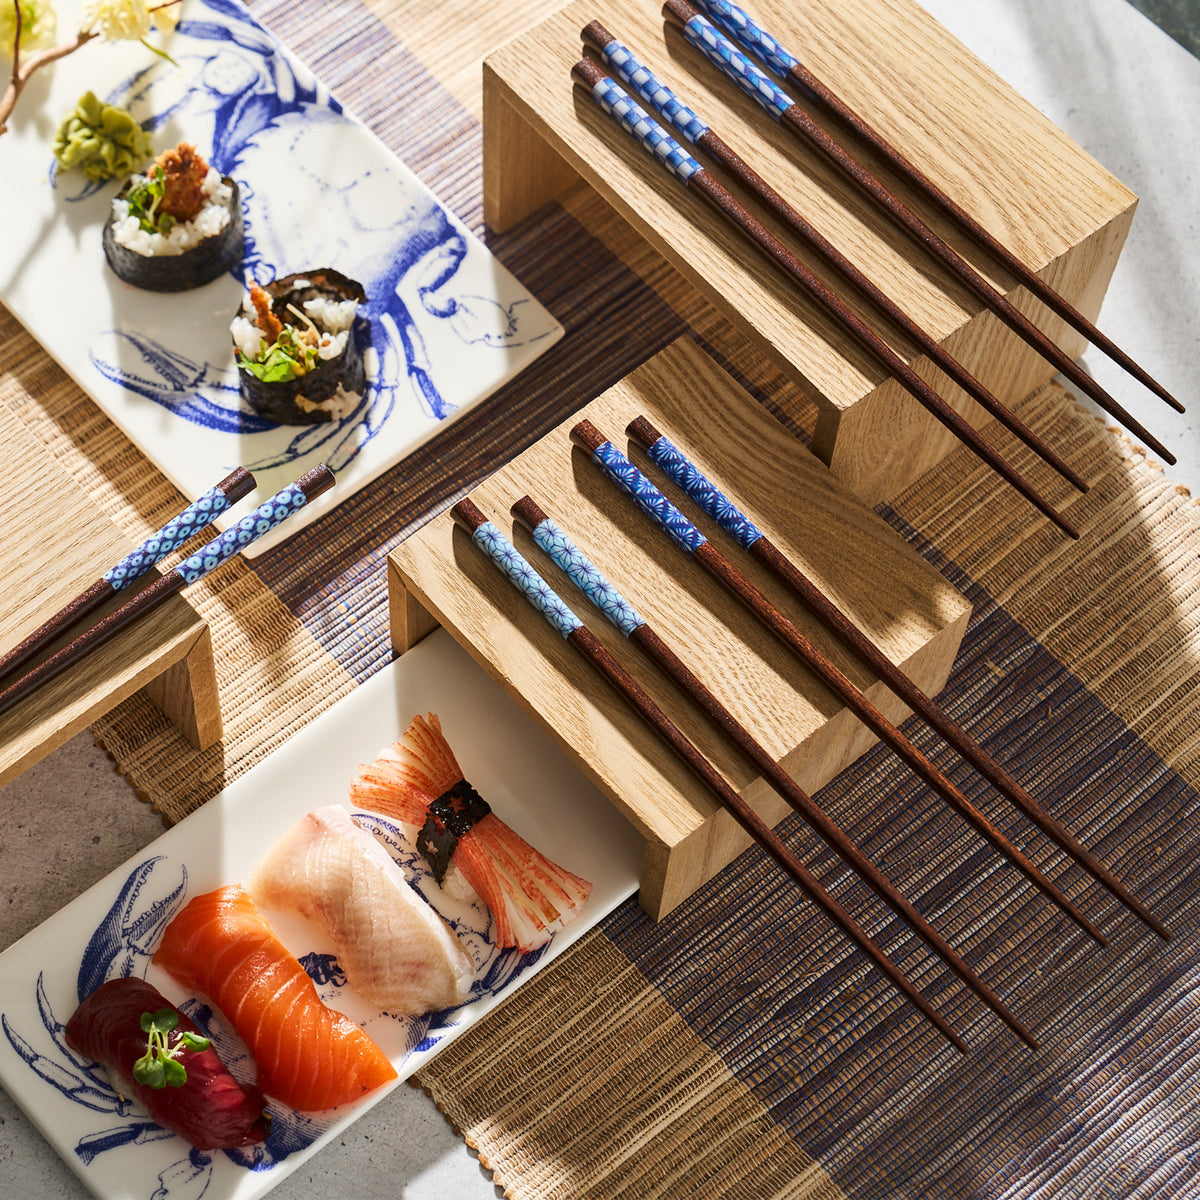 Japanese chopsticks and sushi on a wooden table. The appetizers are beautifully arranged on a Caskata Crab Sushi Tray Large.